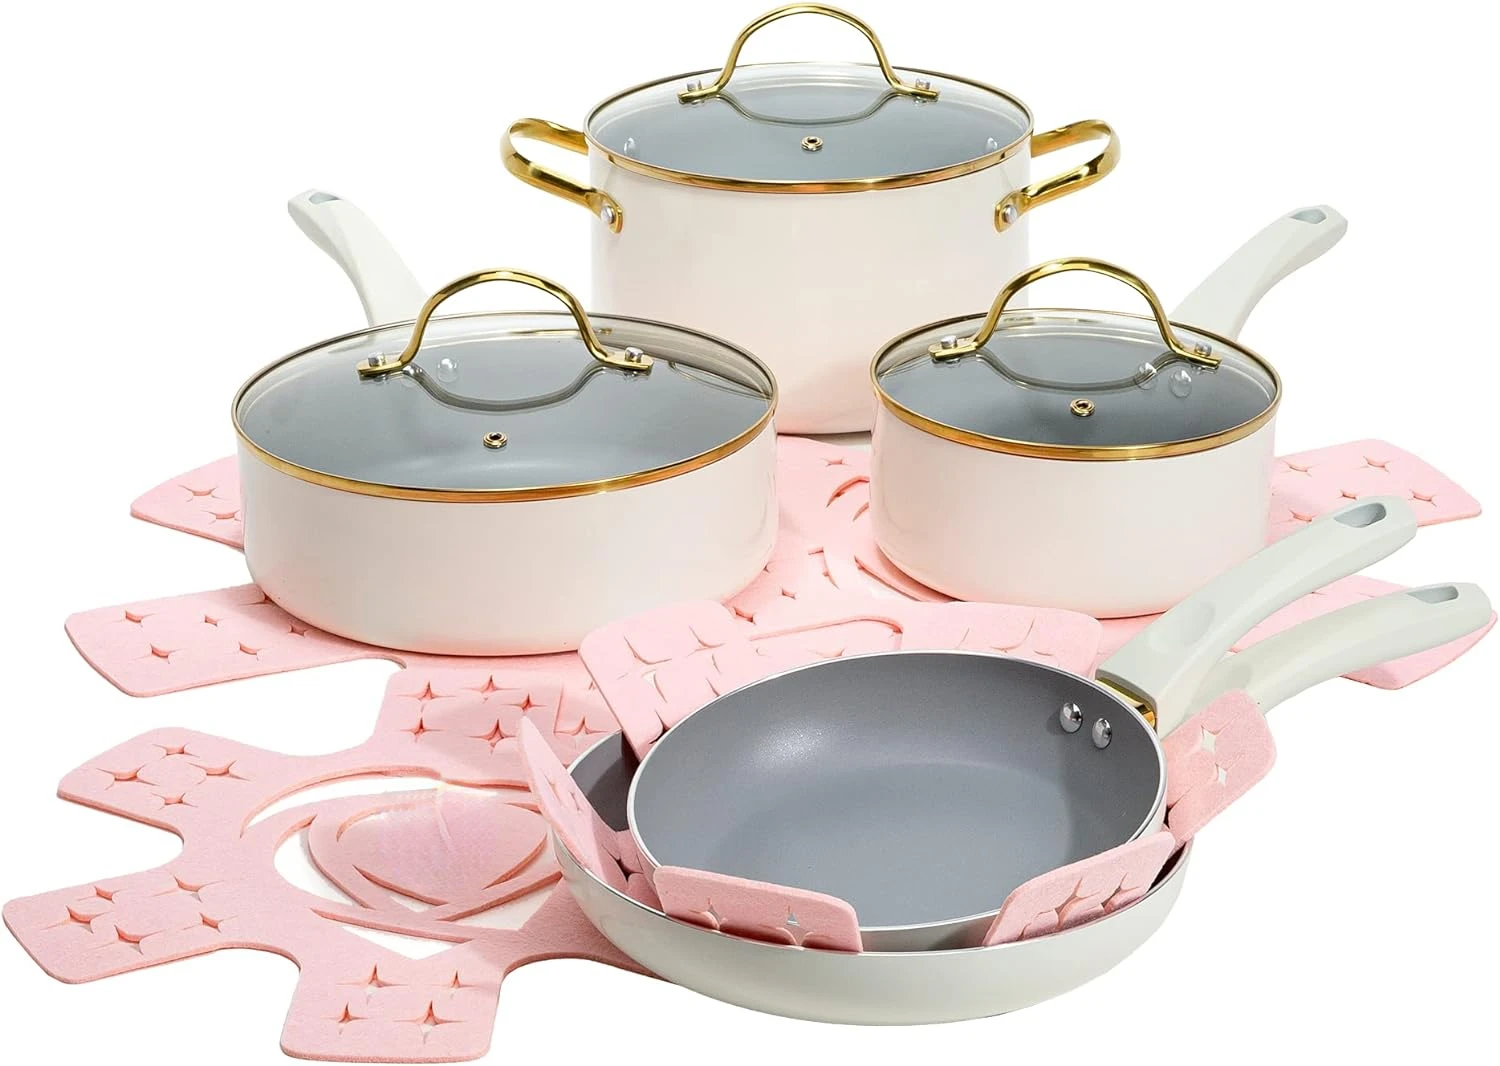 

Epic Nonstick Pots and Pans Set, Multi-layer Nonstick Coating, Tempered Glass Lids, Soft Touch, Stay Cool Handles, Made without